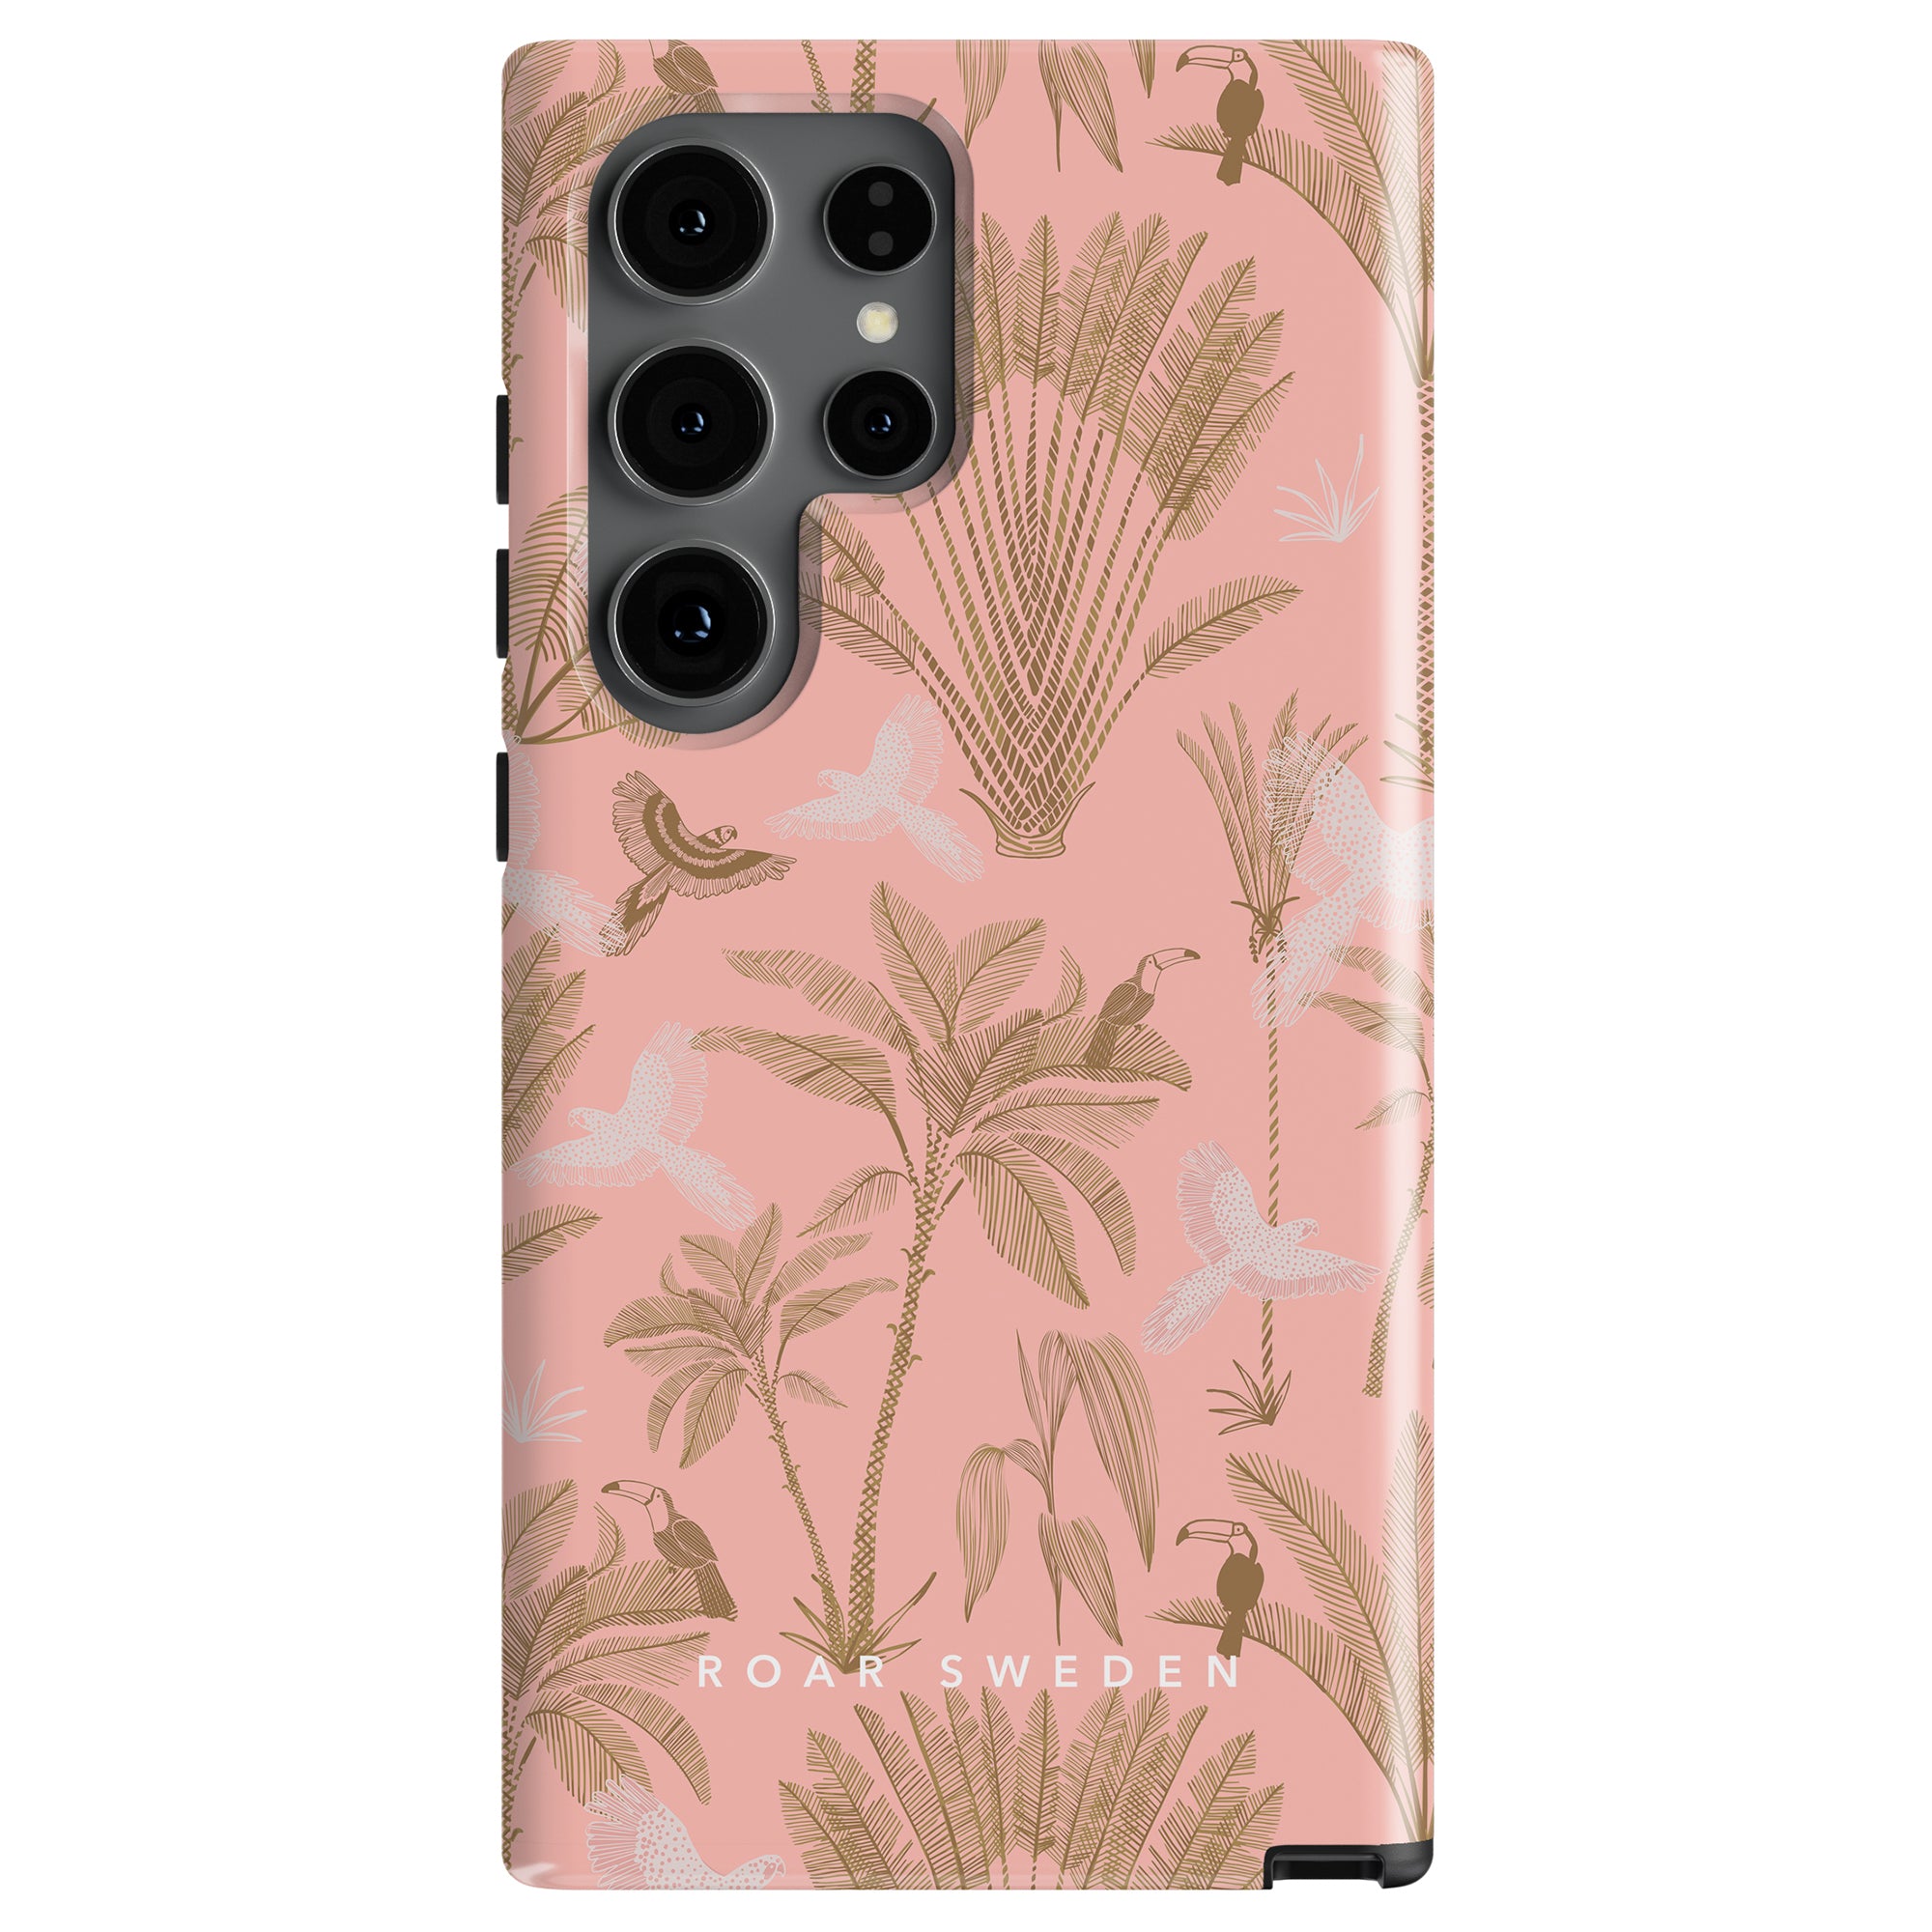 A Birds Paradise - Tough Case for your smartphone, featuring a pink back cover with tropical leaf and bird patterns in brown and white. The text at the bottom reads "ROAR SWEDEN." This stylish mobilaccessoar has four buttons visible on the left side, perfect for iPhone och Samsung skal.